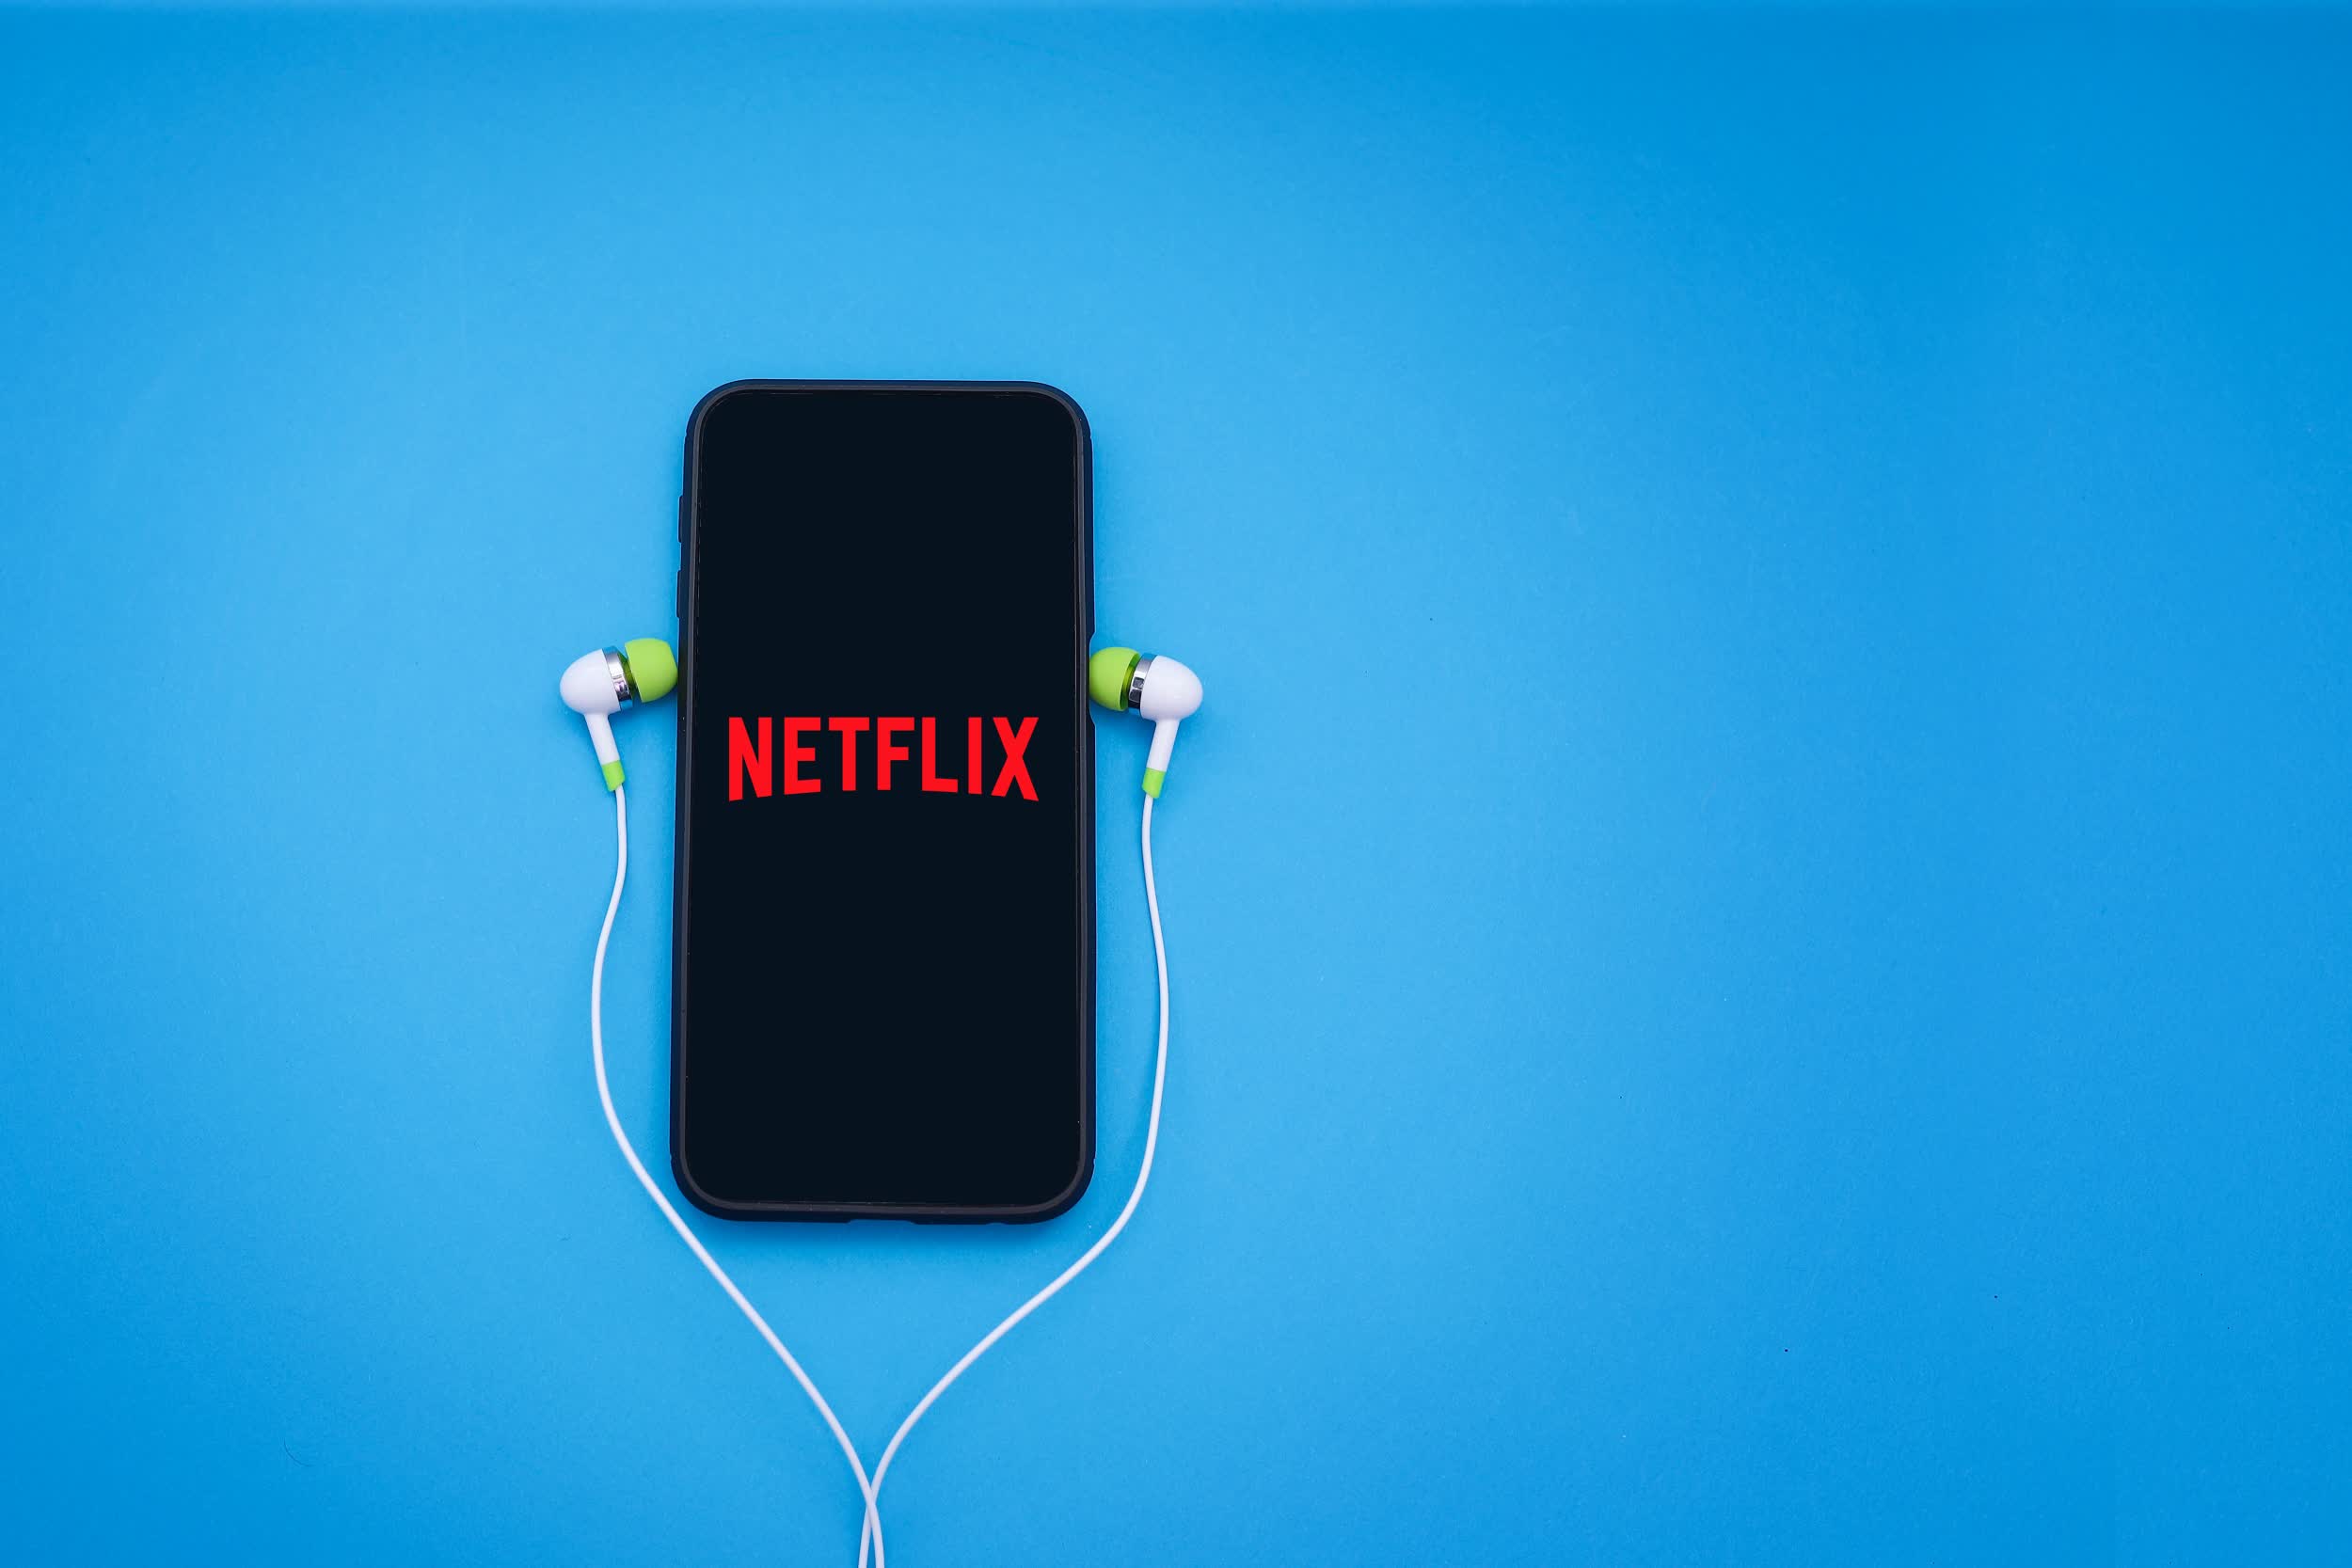 Netflix's mobile app is getting an audio-only mode